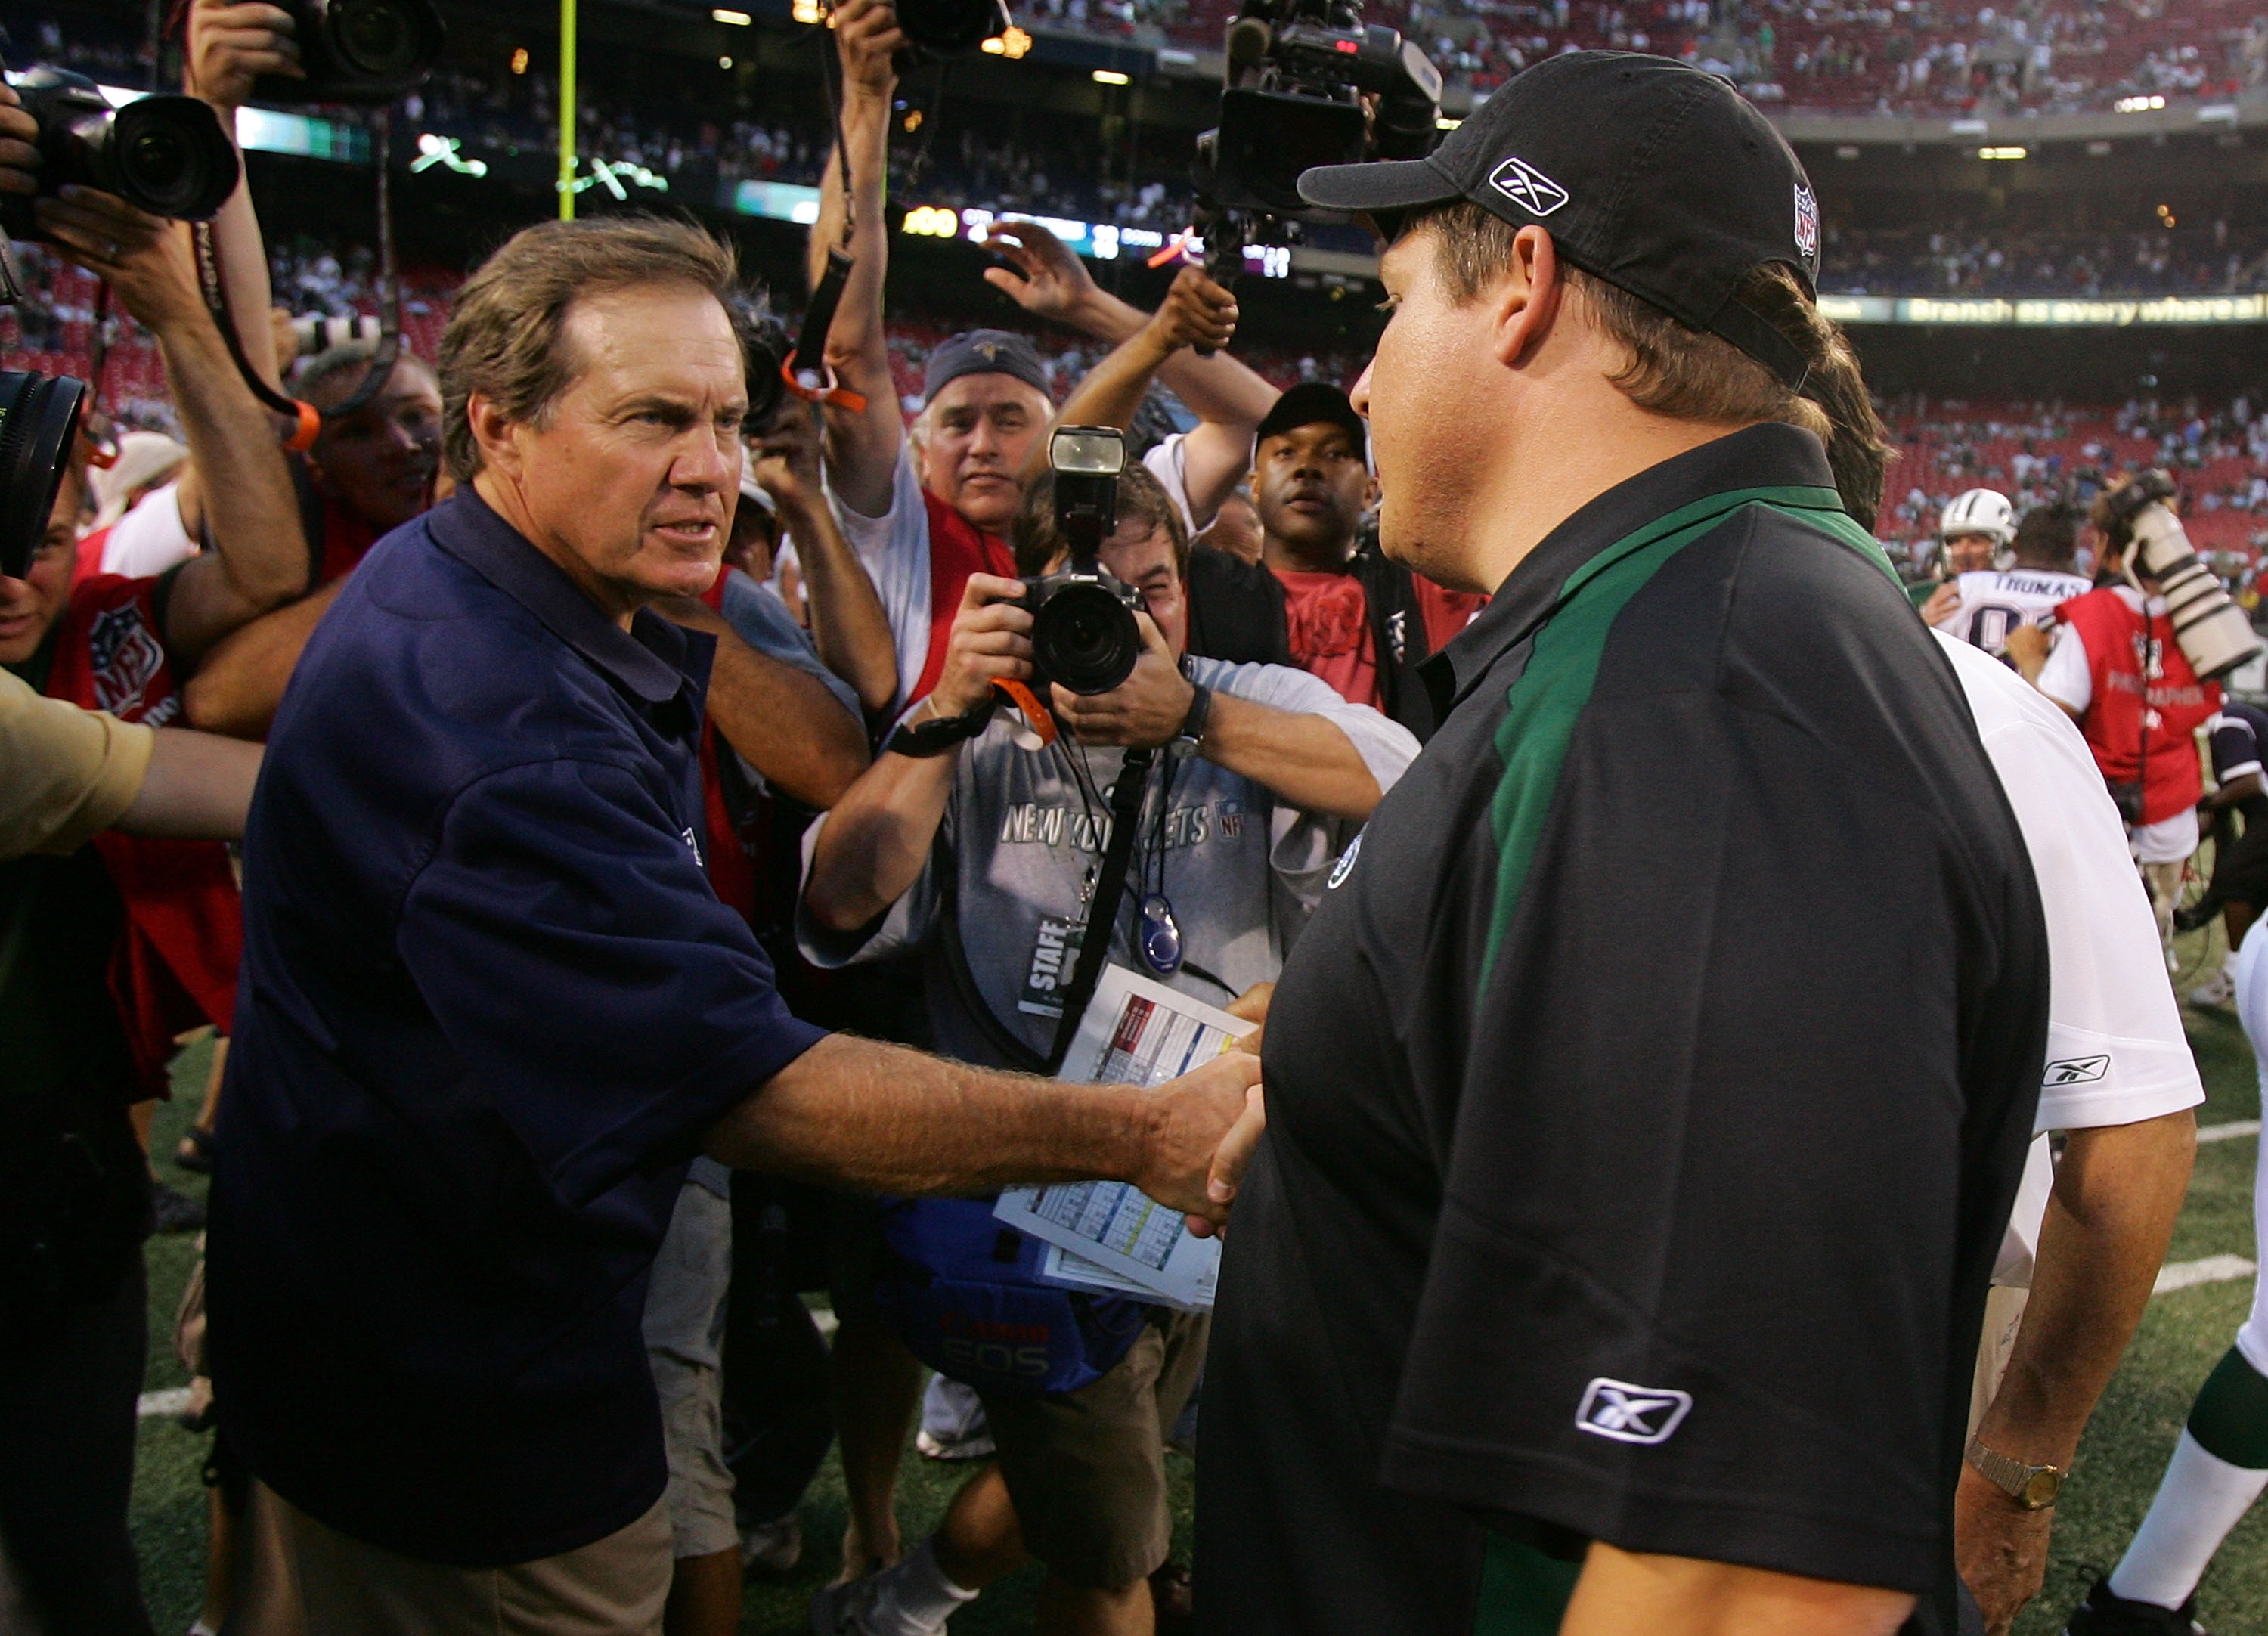 EAST RUTHERFORD, NJ - SEPTEMBER 14: Head coach Eric Mangini (R) of the New York Jets congratulates head coach Bill Belichick of the New England Patriots after their game on September 14, 2008 at Giants Stadium in East Rutherford, New Jersey. The Patriots